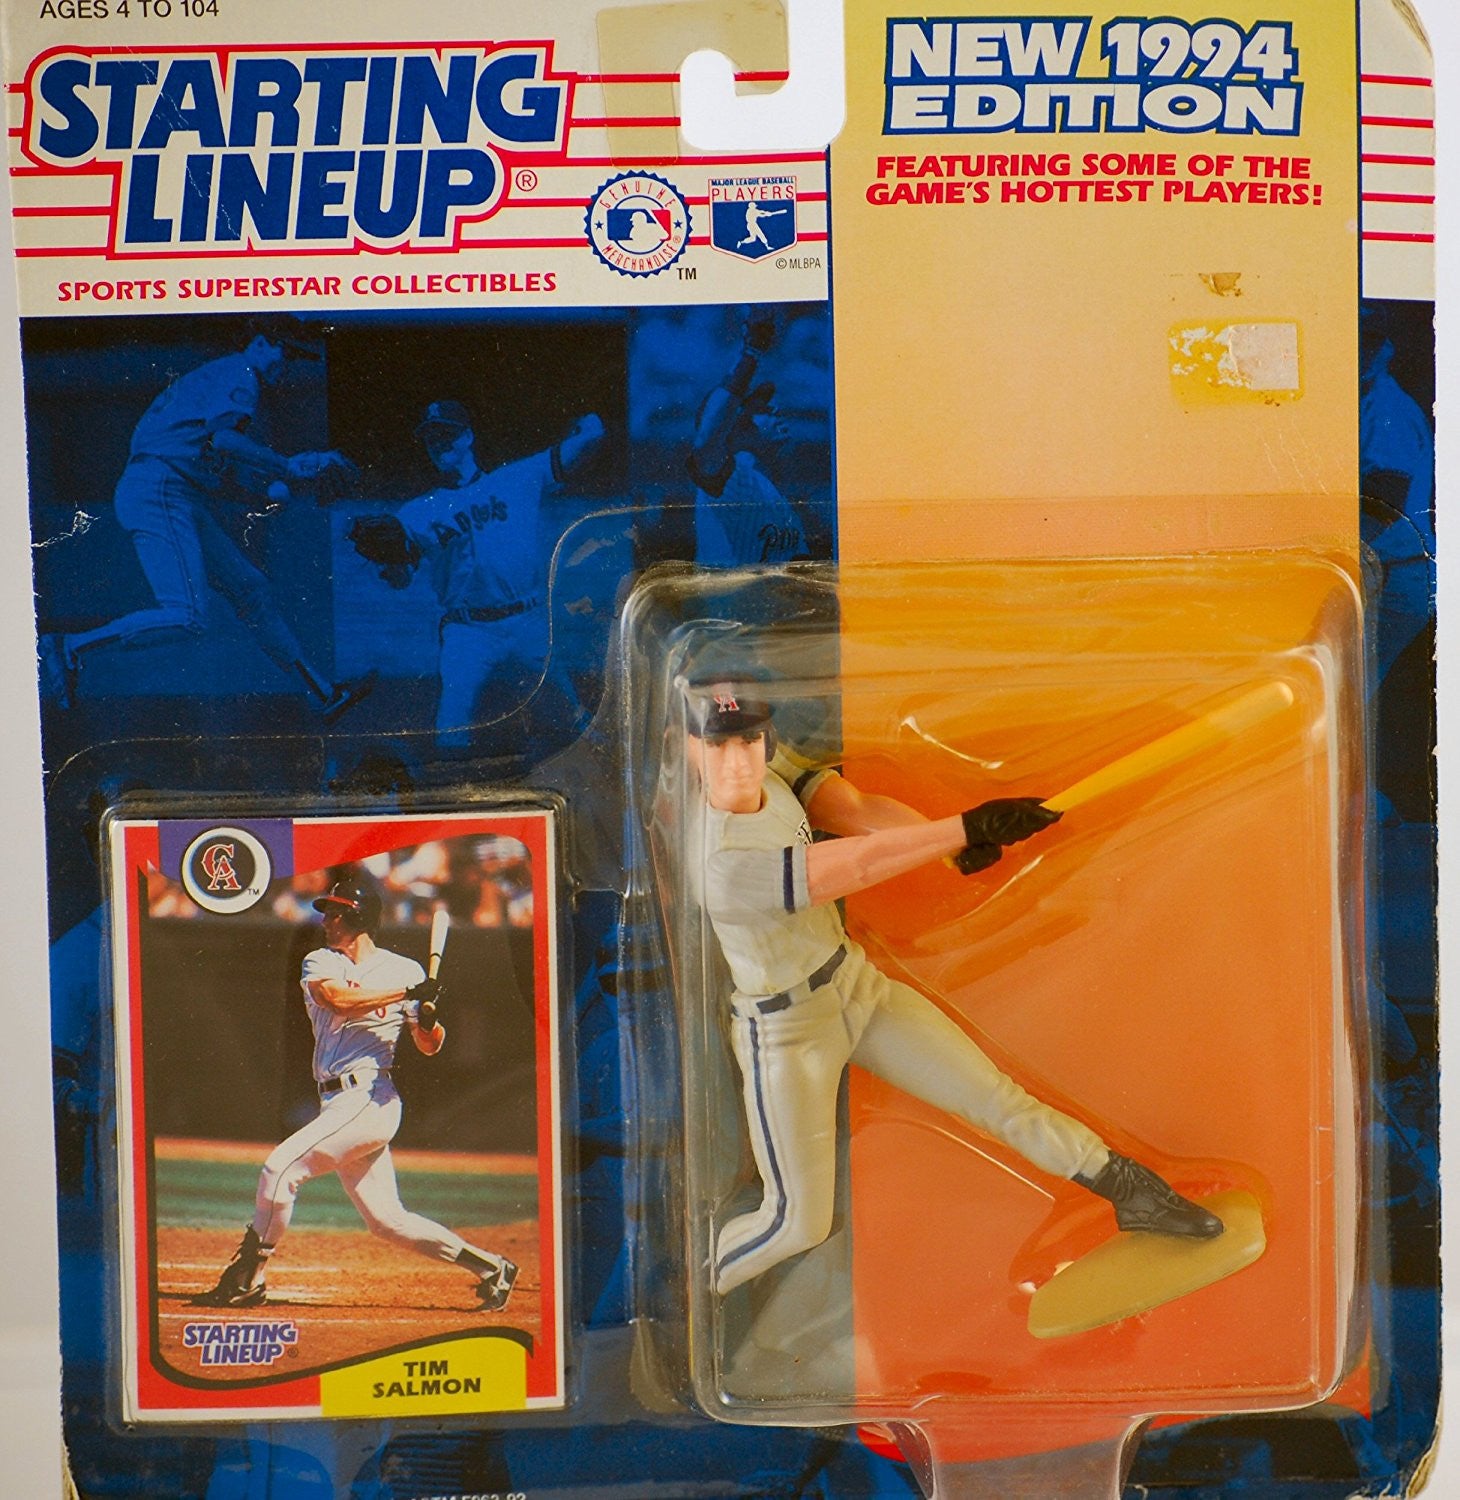 1994 Starting Lineup MLB Tim Salmon #15 California Angels Vintage Action Figure - w/ Trading Card - Limited Edition - Collectible